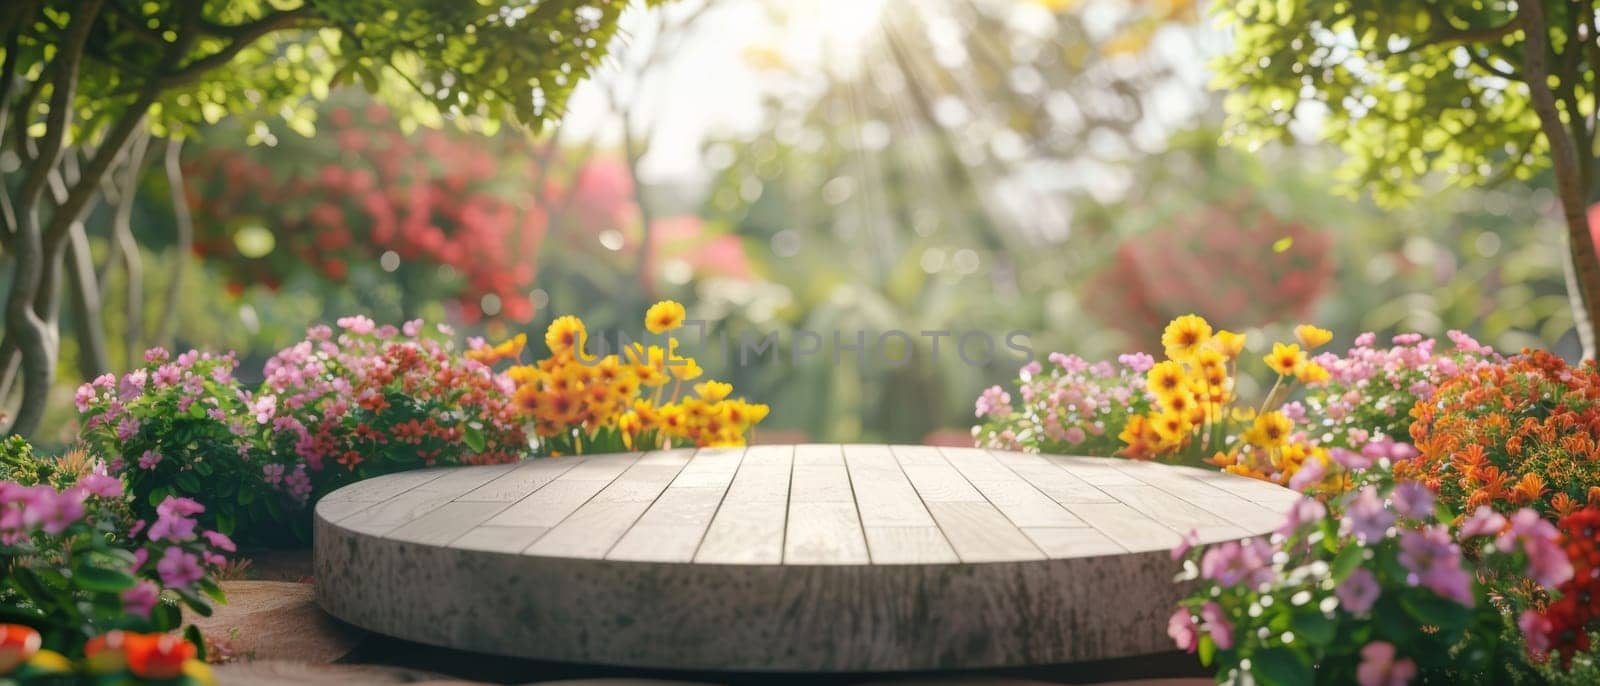 A tranquil garden setting with a wooden podium framed by an array of colorful blooms in soft sunlight. by sfinks